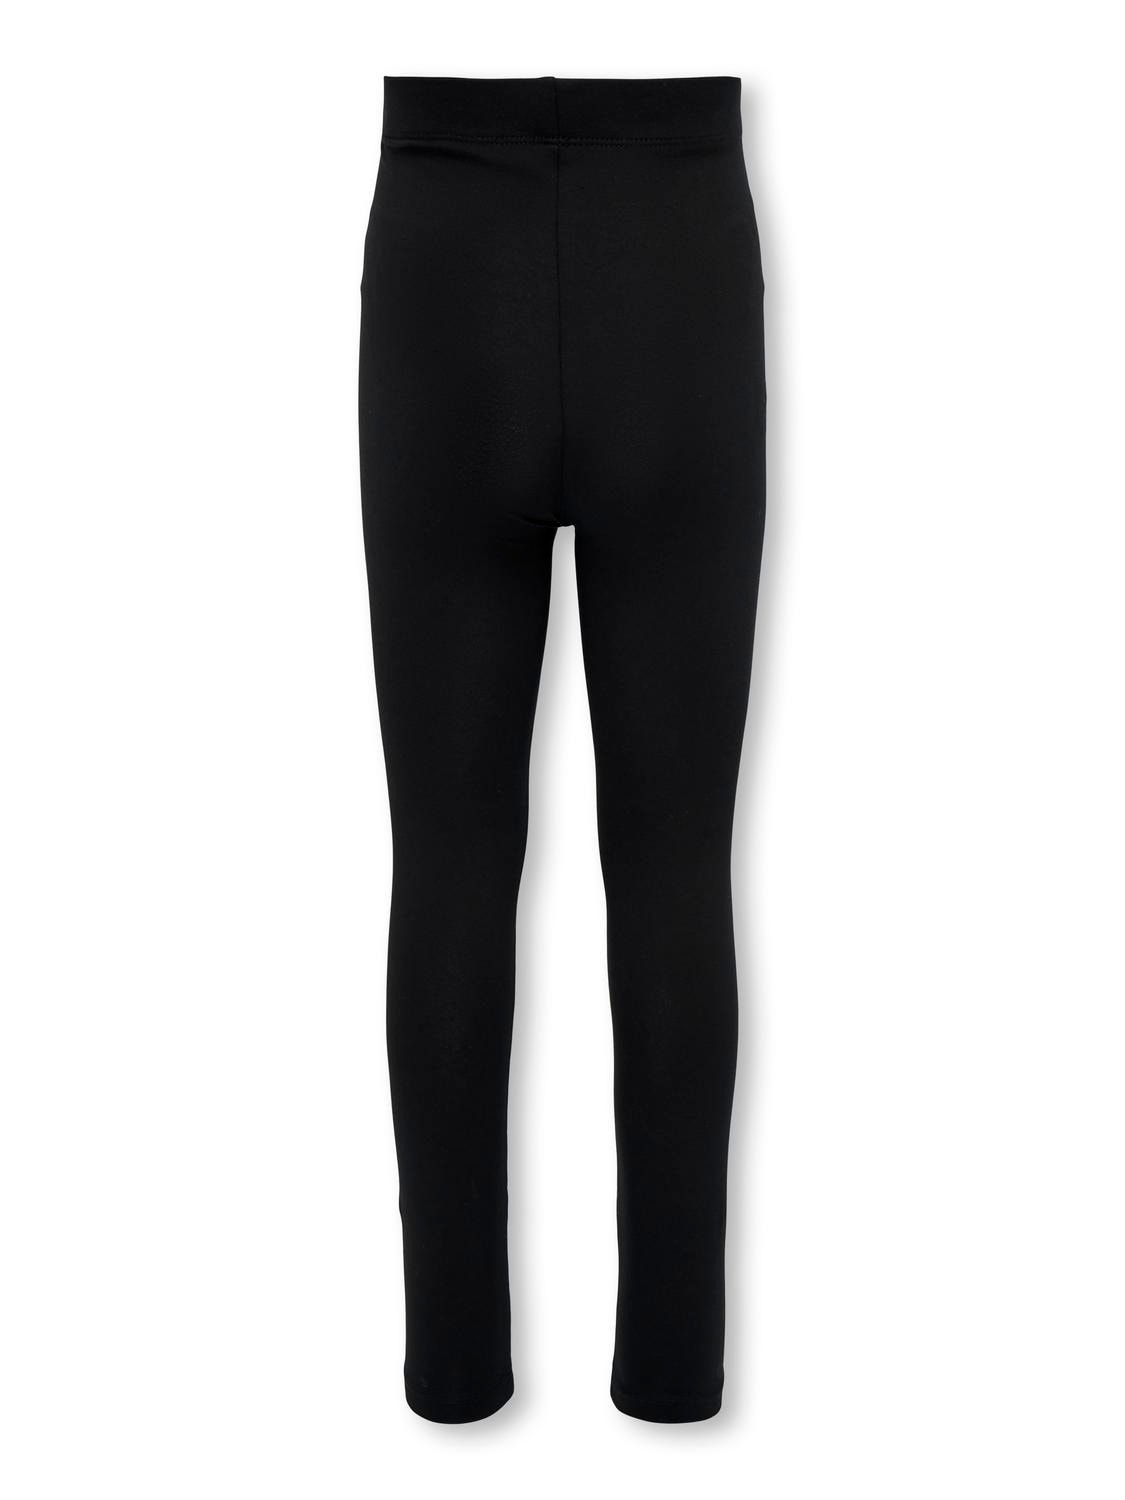 ONLY Tight fit Legging -Black - 15303591